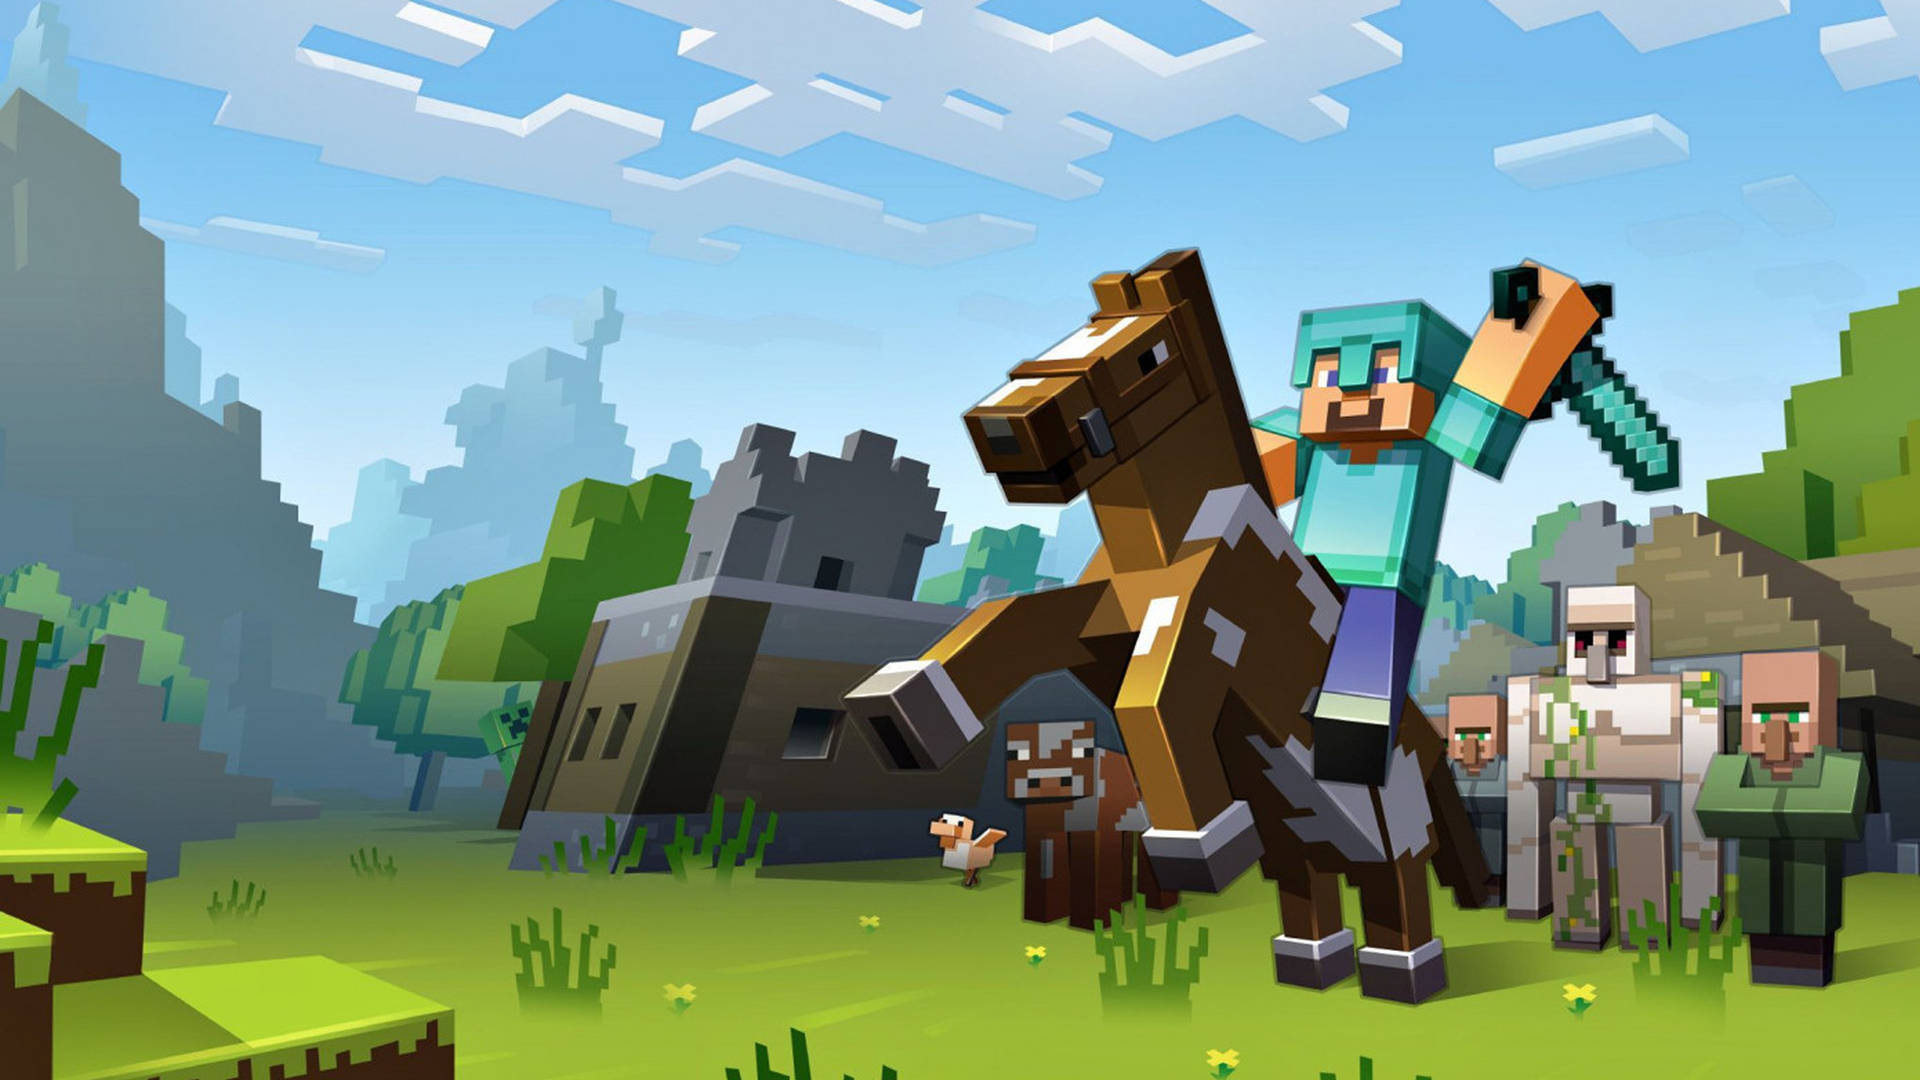 Armored Steve On A Horse 2560x1440 Minecraft Picture